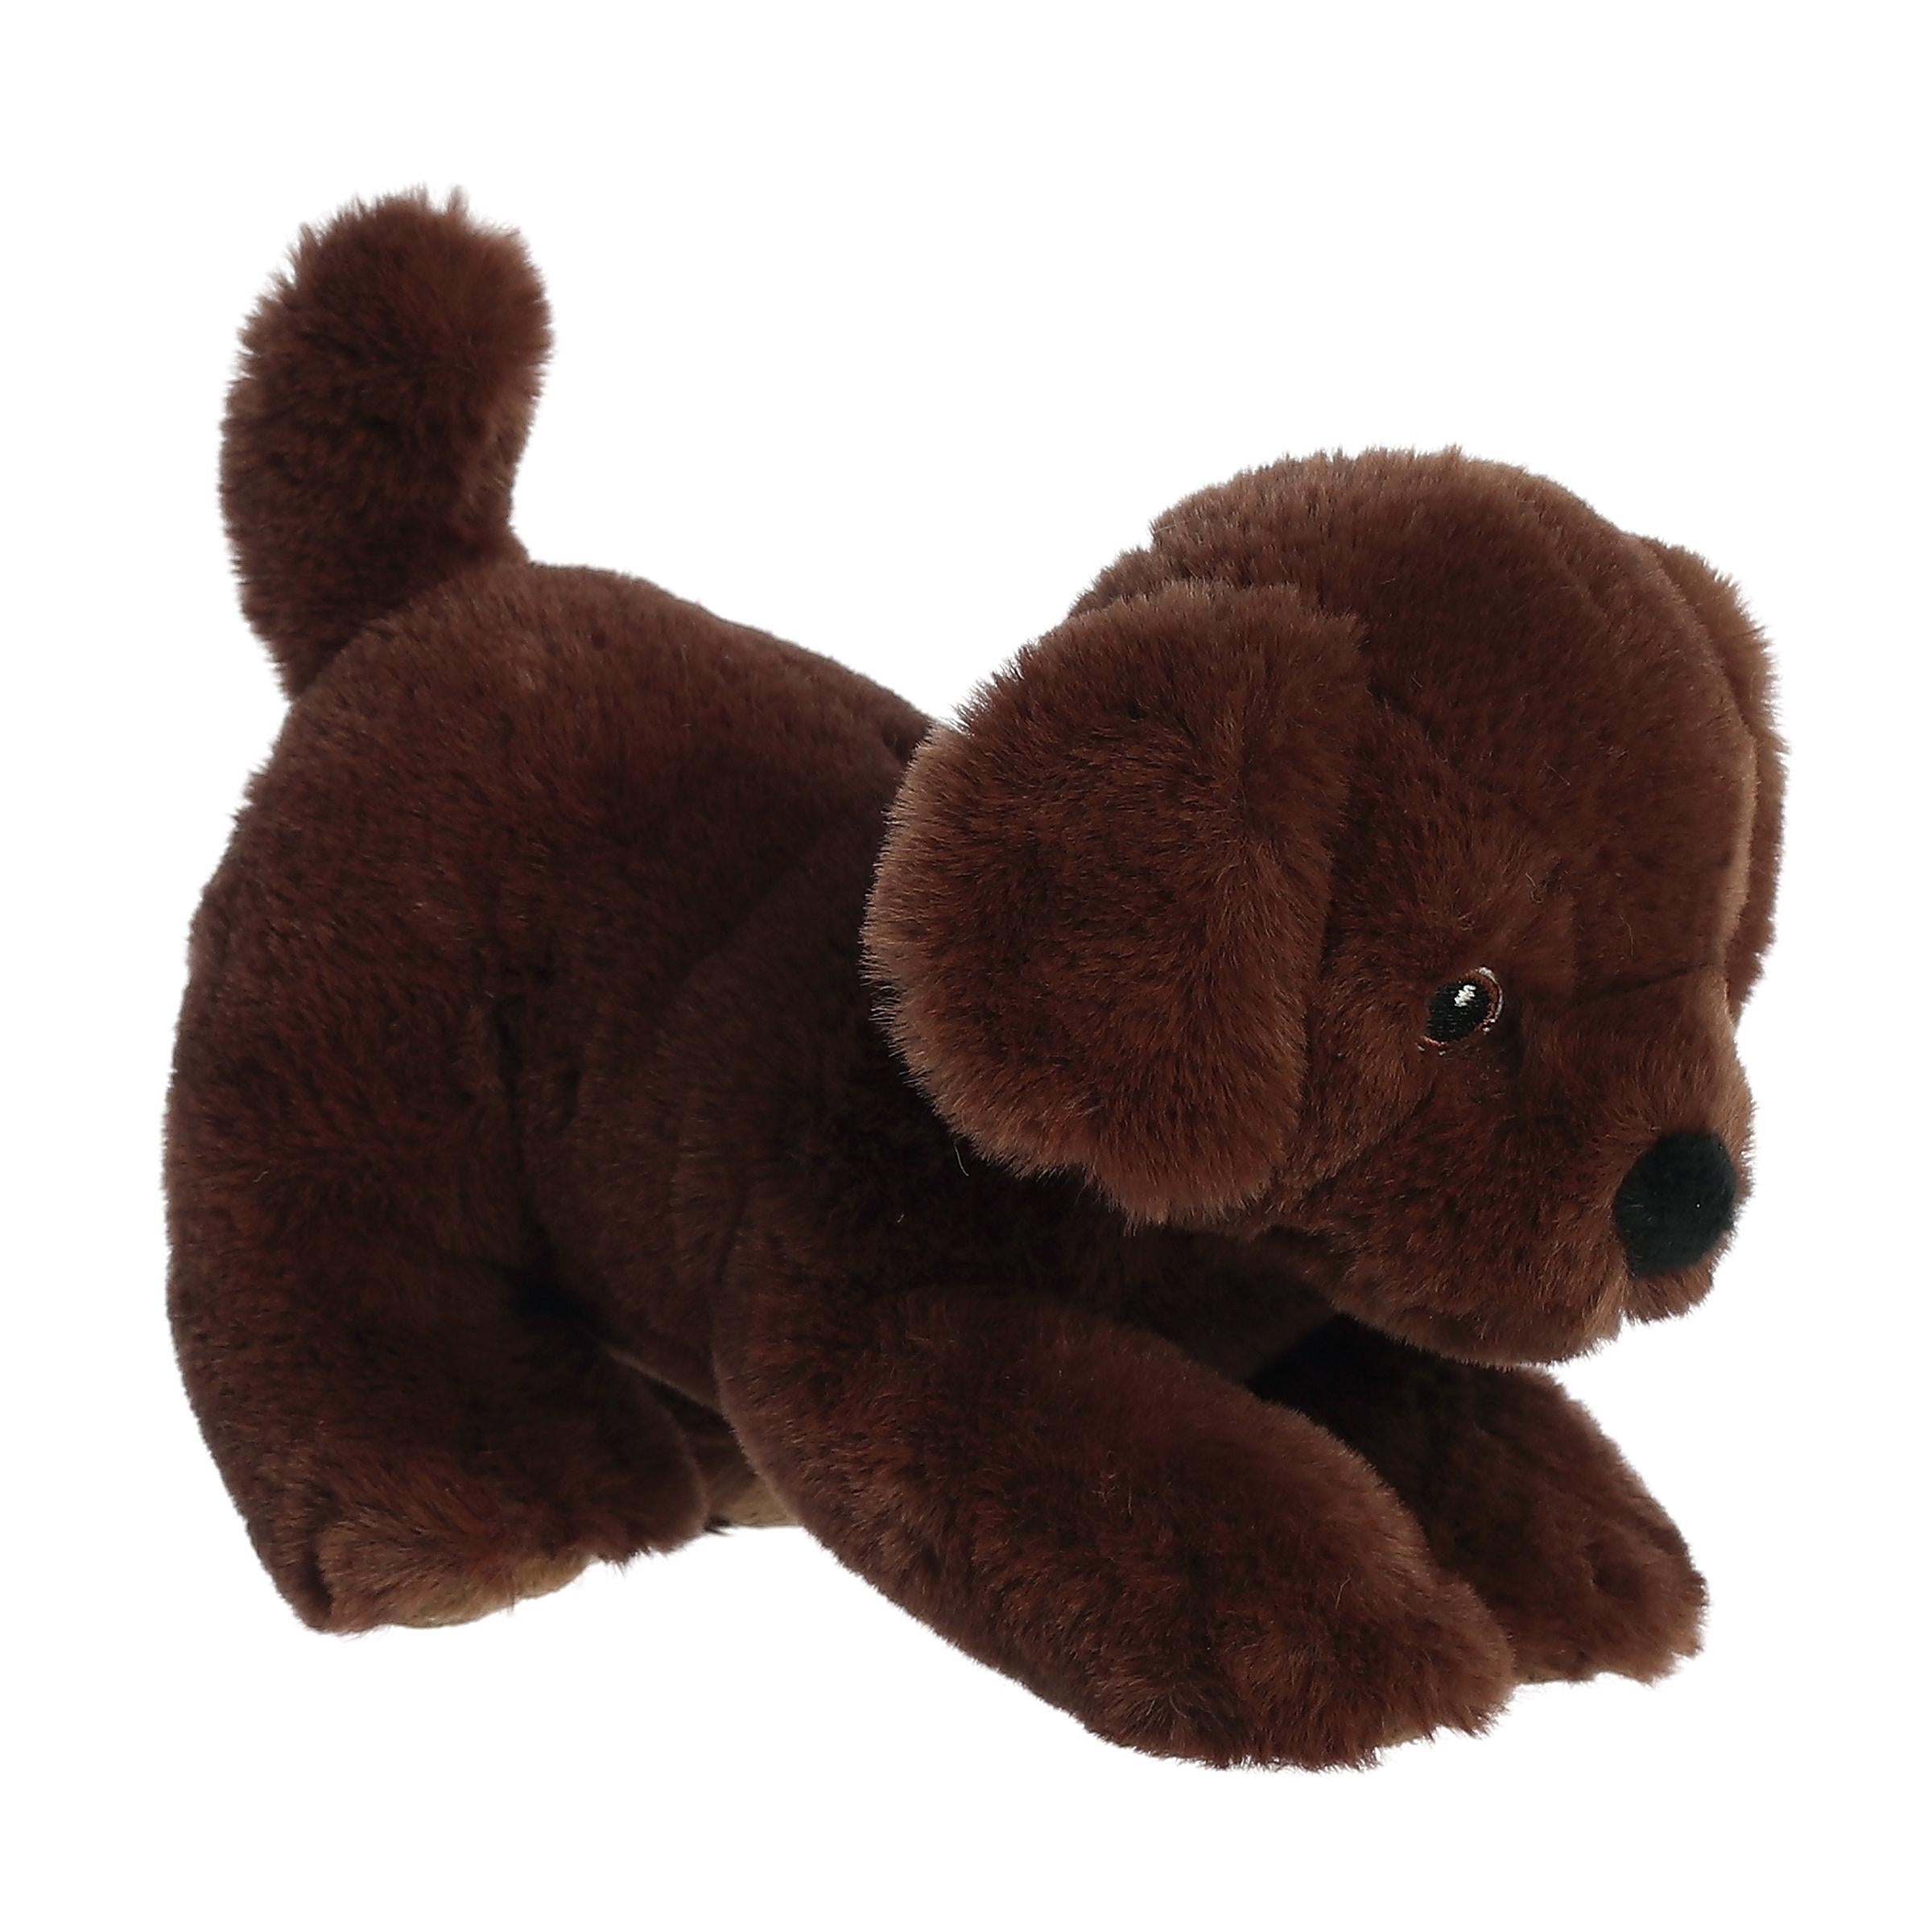 Peluche ourson Be Eco pour chien - Huberland